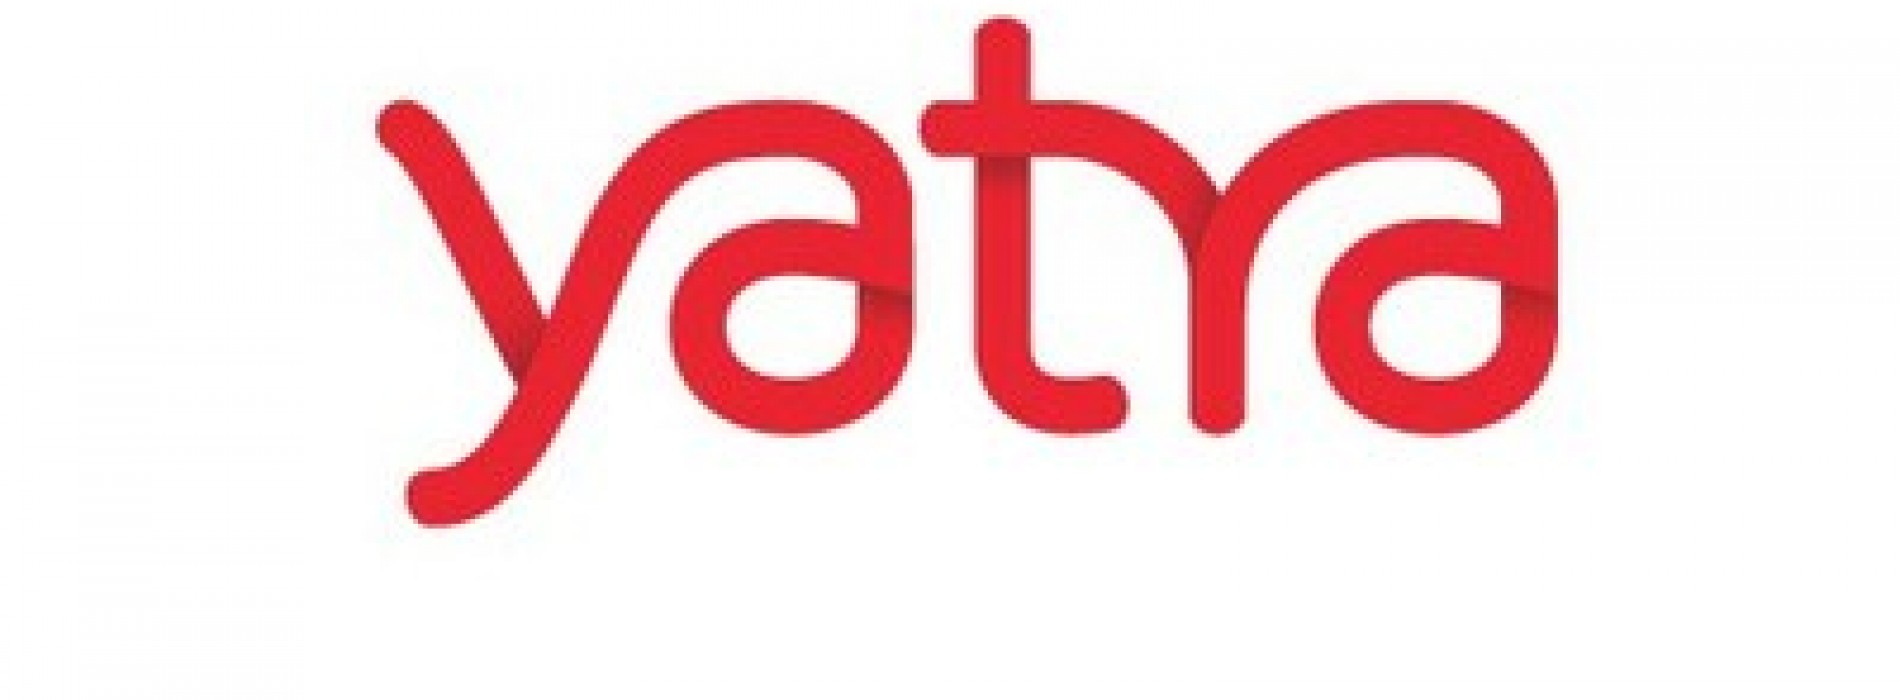 Yatra Online Limited announces the appointment of Dr. Anup Wadhawan as the new independent Director of the company